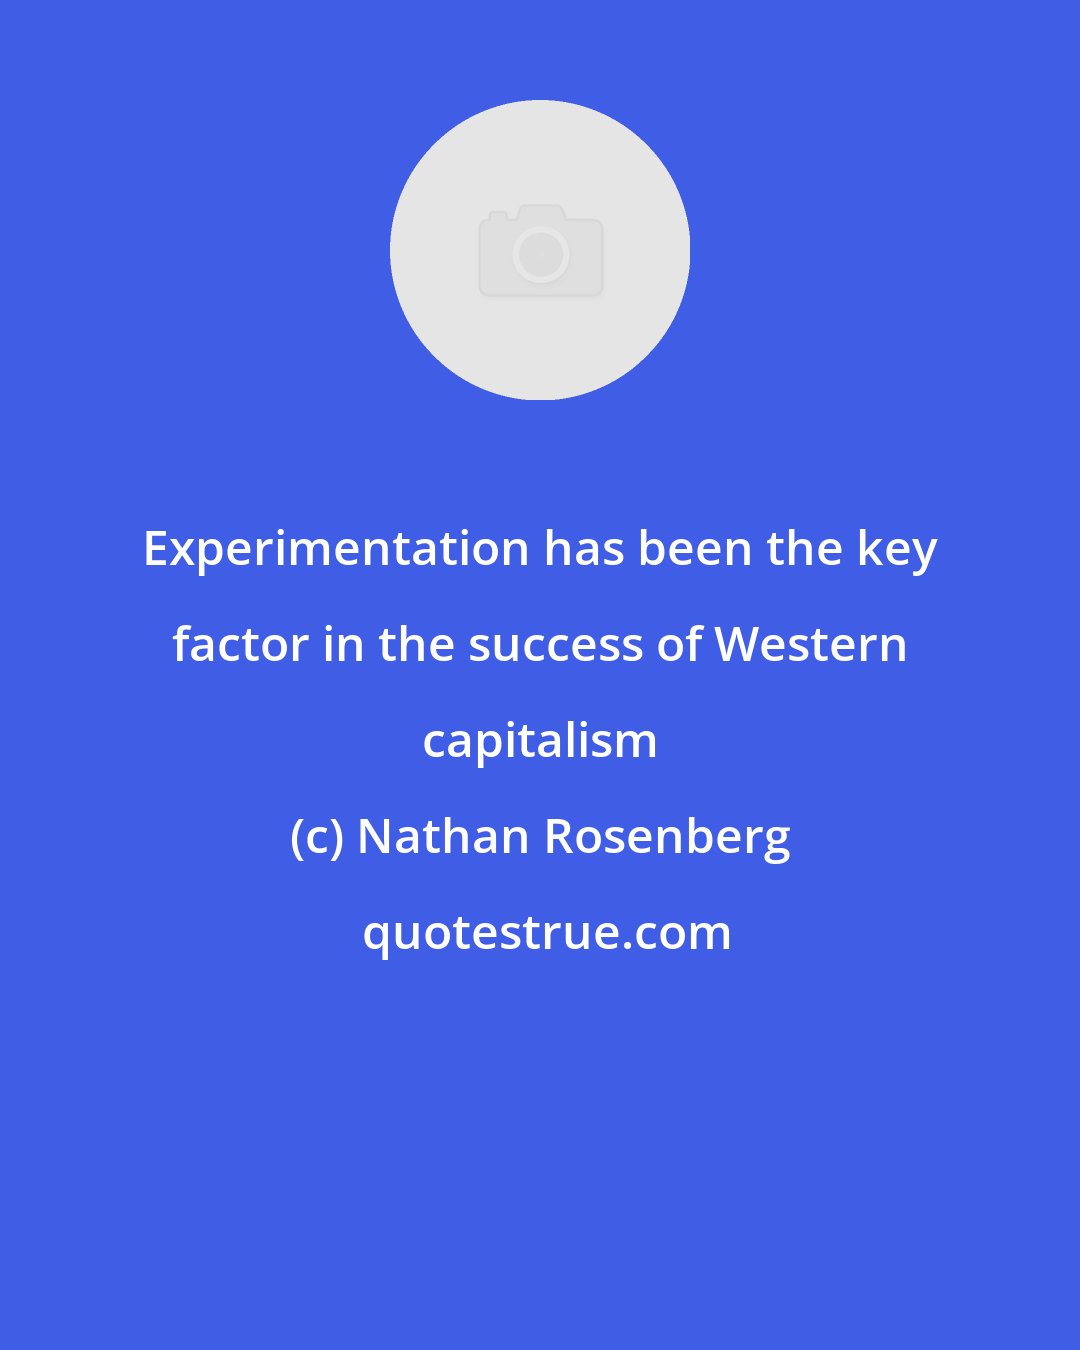 Nathan Rosenberg: Experimentation has been the key factor in the success of Western capitalism